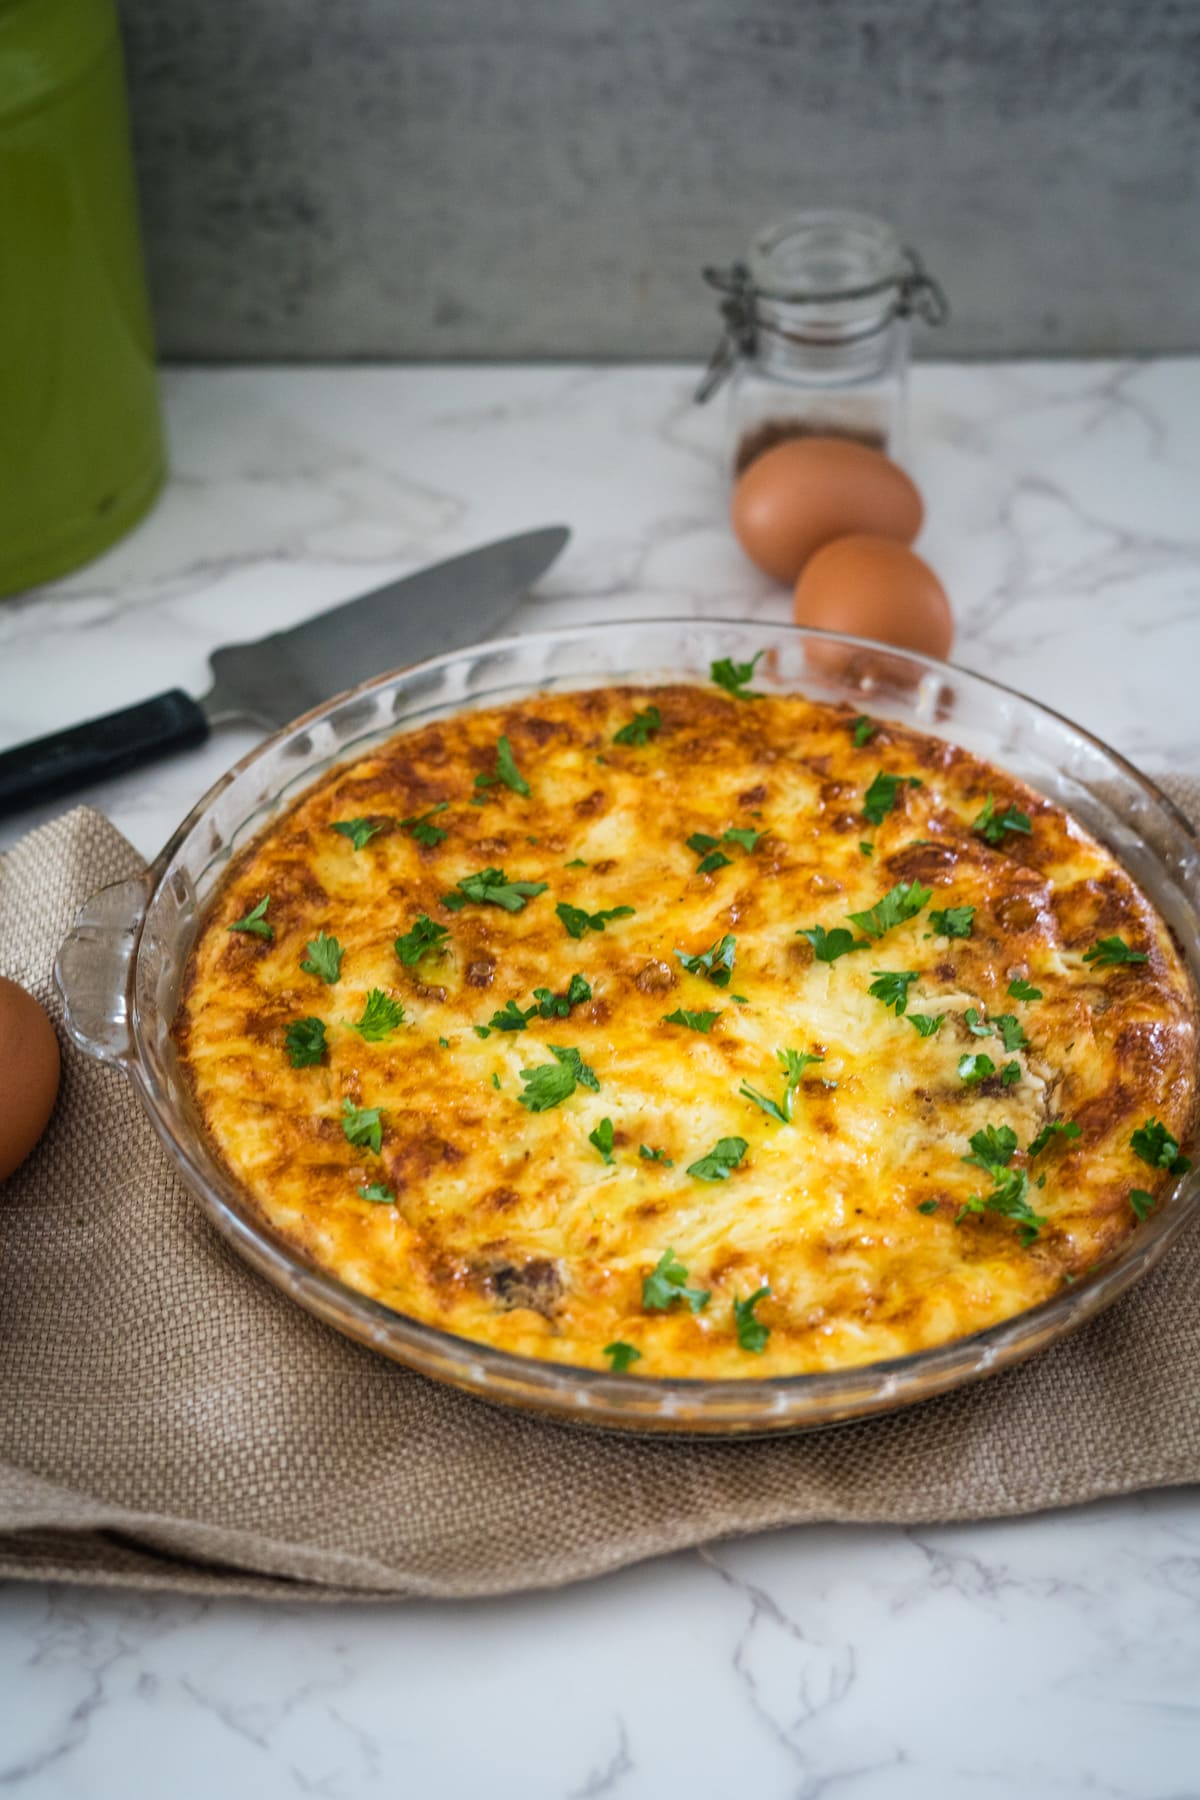 A quiche with eggs and parsley on a table.